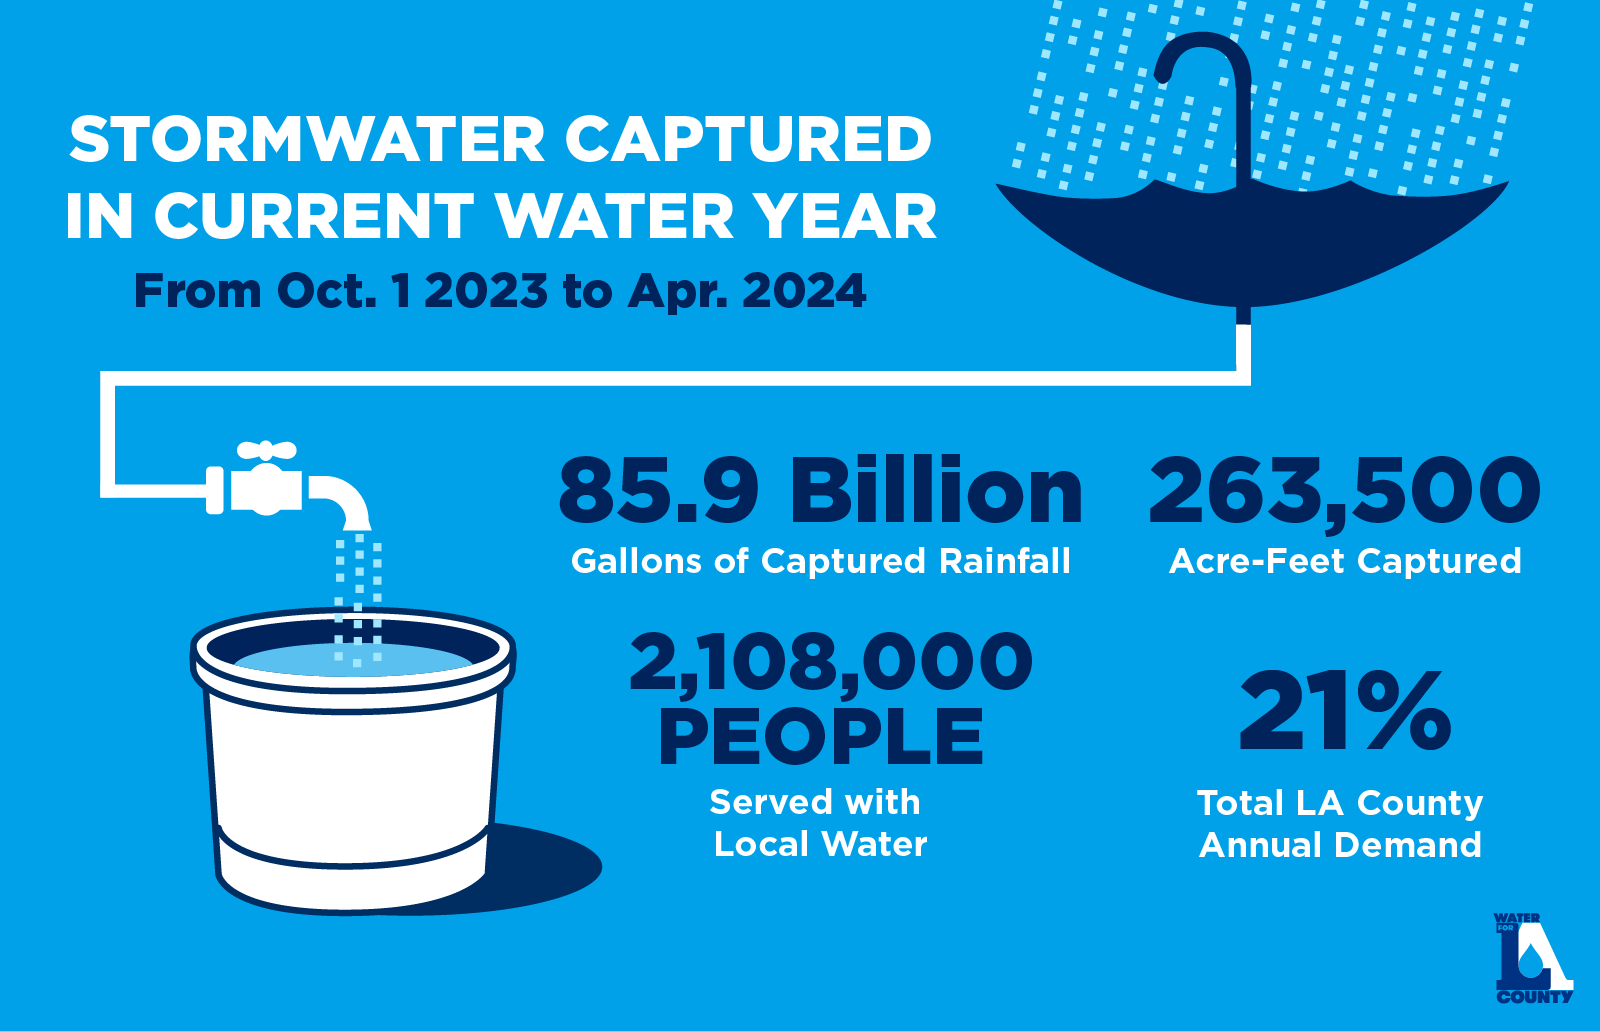 Stormwater Captured in Current Water Year (From Oct. 1 2023 to Apr. 2024). 85.9 Billion Gallons of Captured Rainfall. 263,500 Acre-Feet Captured. 2,108,000 People Served with Local Water. 21% Total LA County Annual Demand.